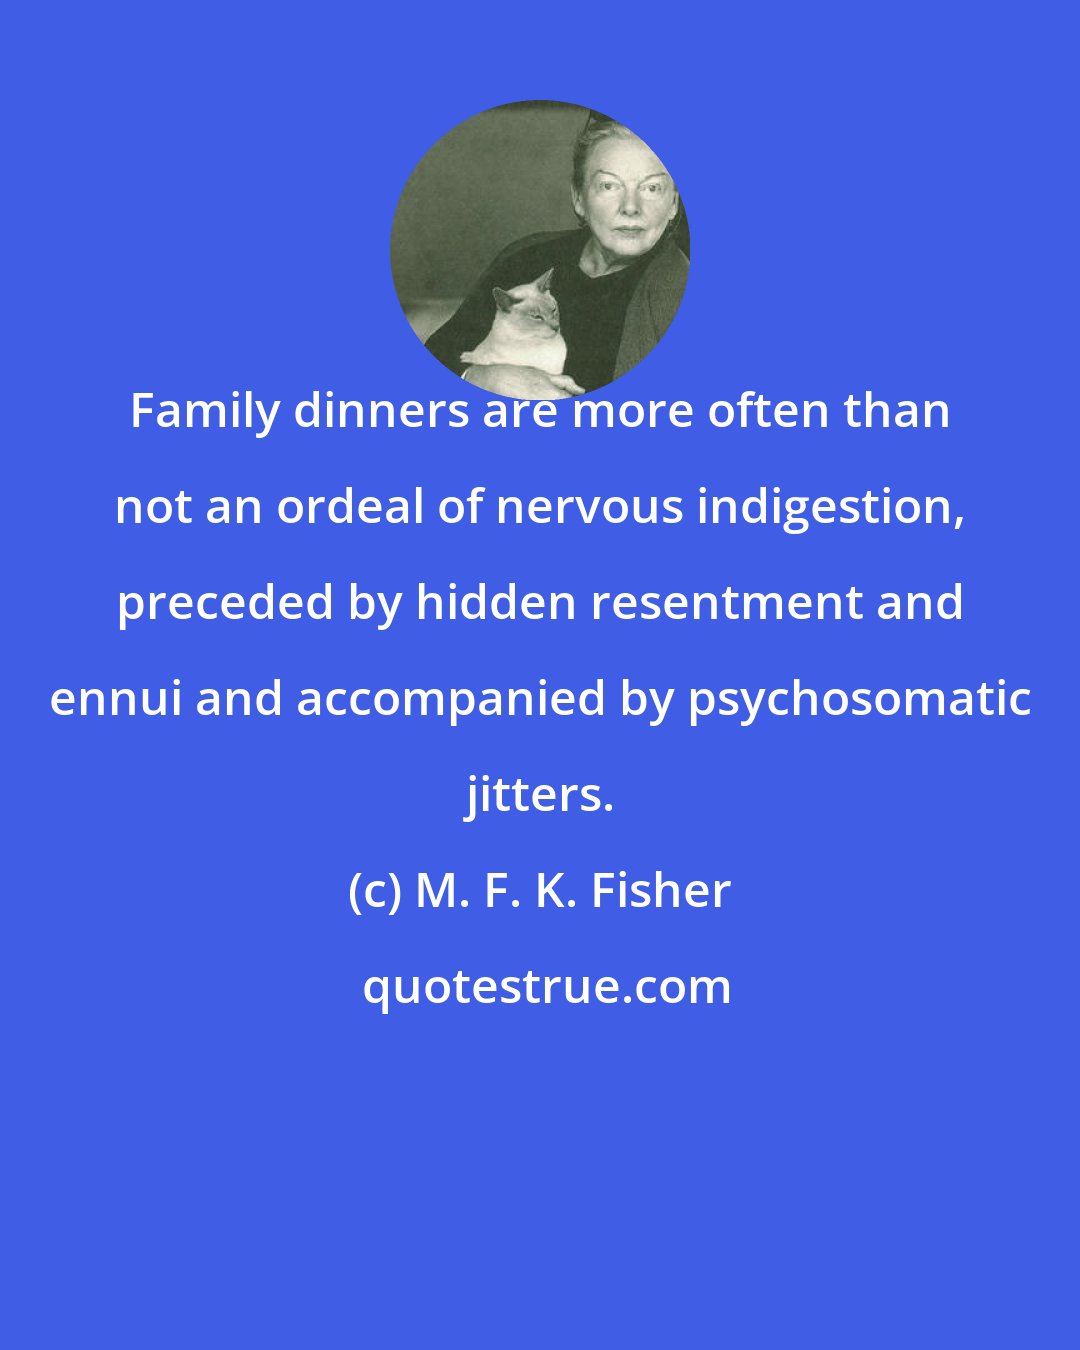 M. F. K. Fisher: Family dinners are more often than not an ordeal of nervous indigestion, preceded by hidden resentment and ennui and accompanied by psychosomatic jitters.